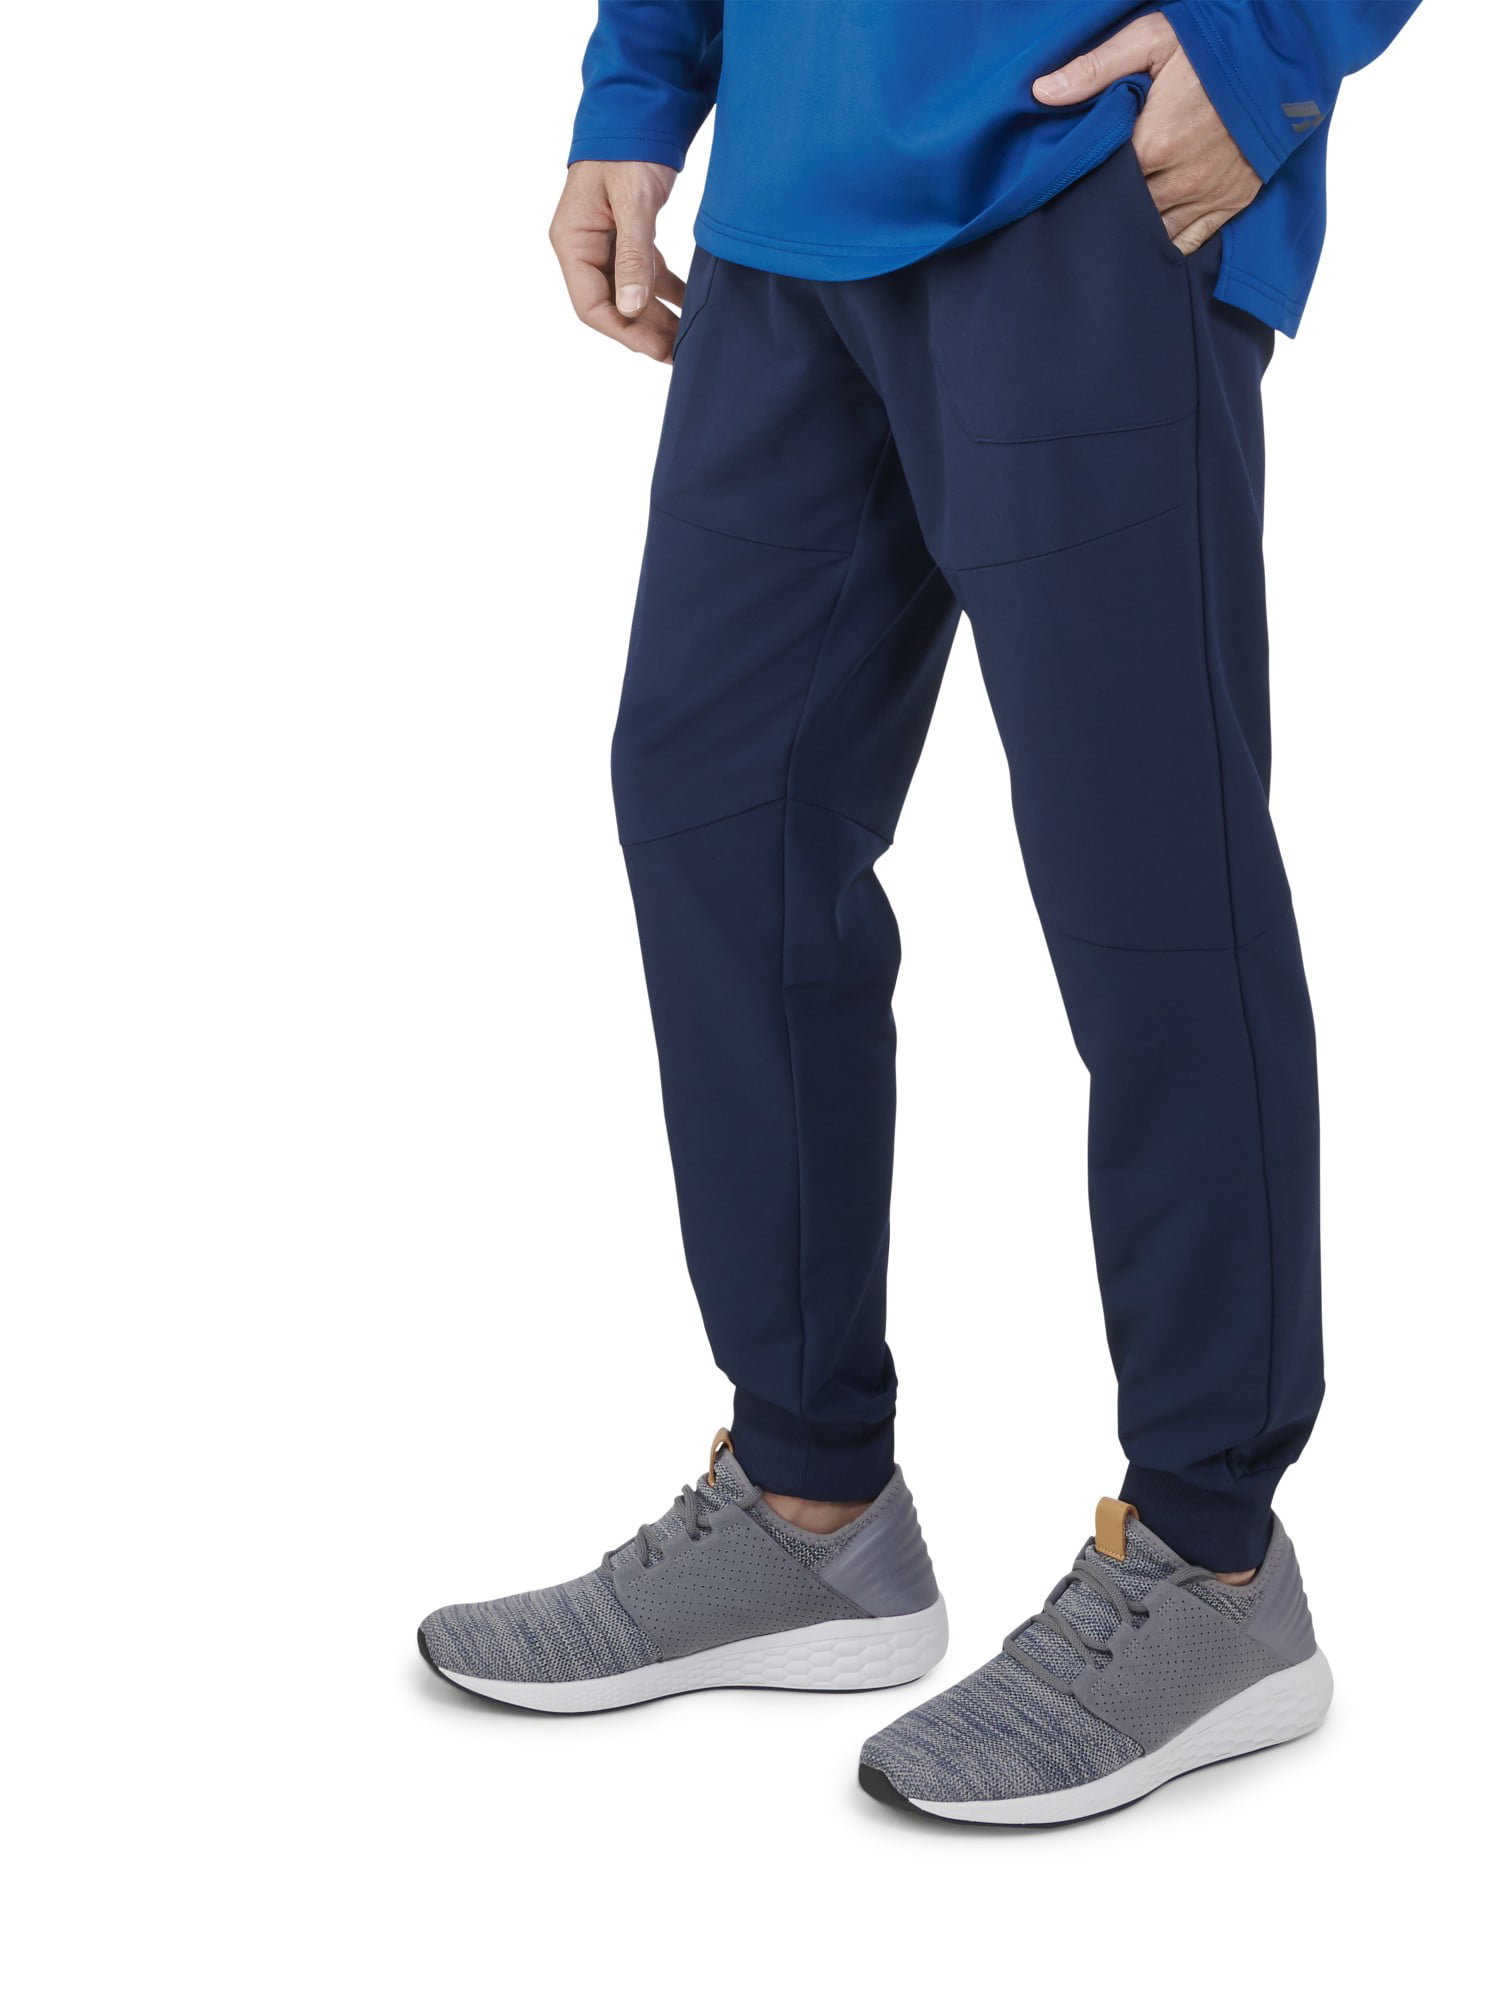 Russell - Russell Men's Woven Performance Jogger, up to 5XL - Walmart ...